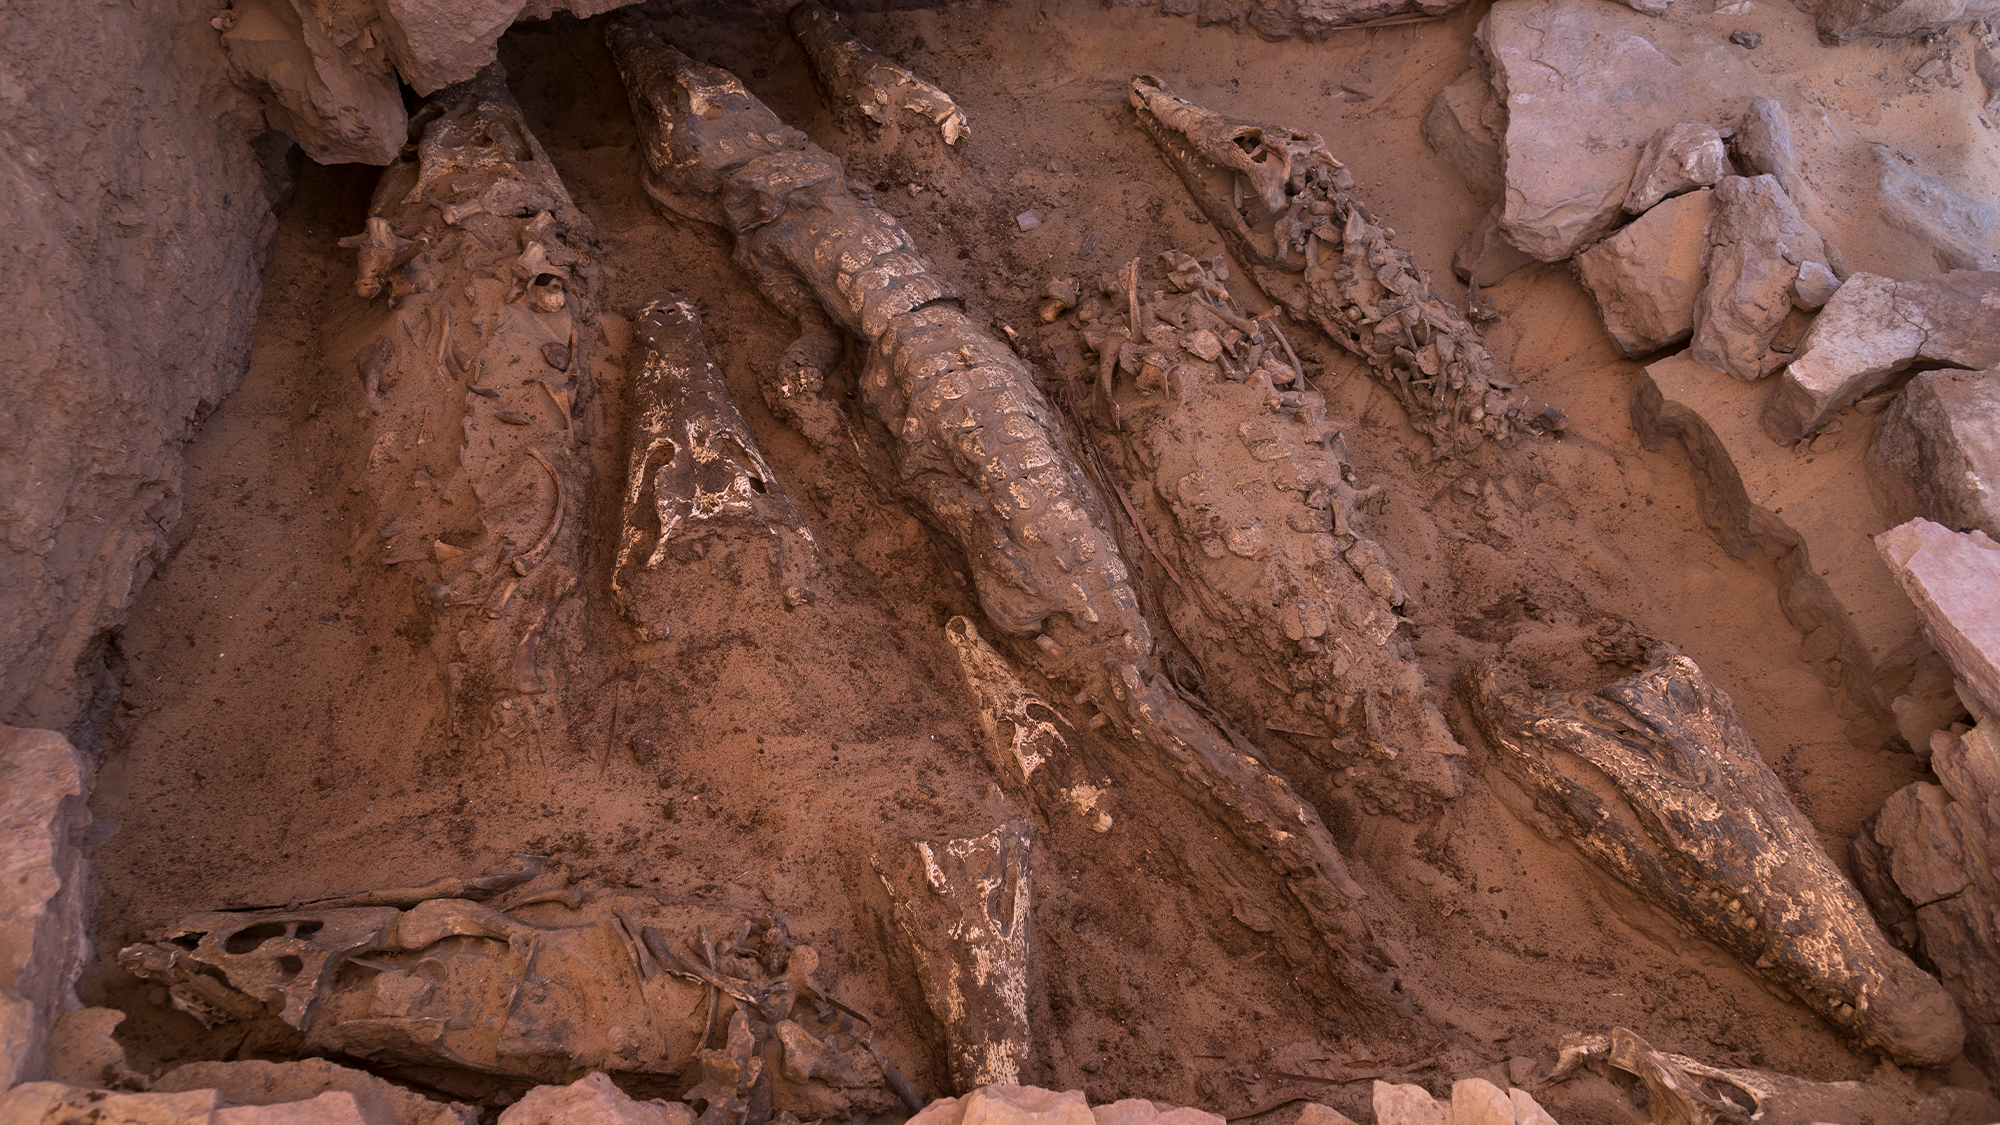 An overview of mummified crocodiles during an excavation.